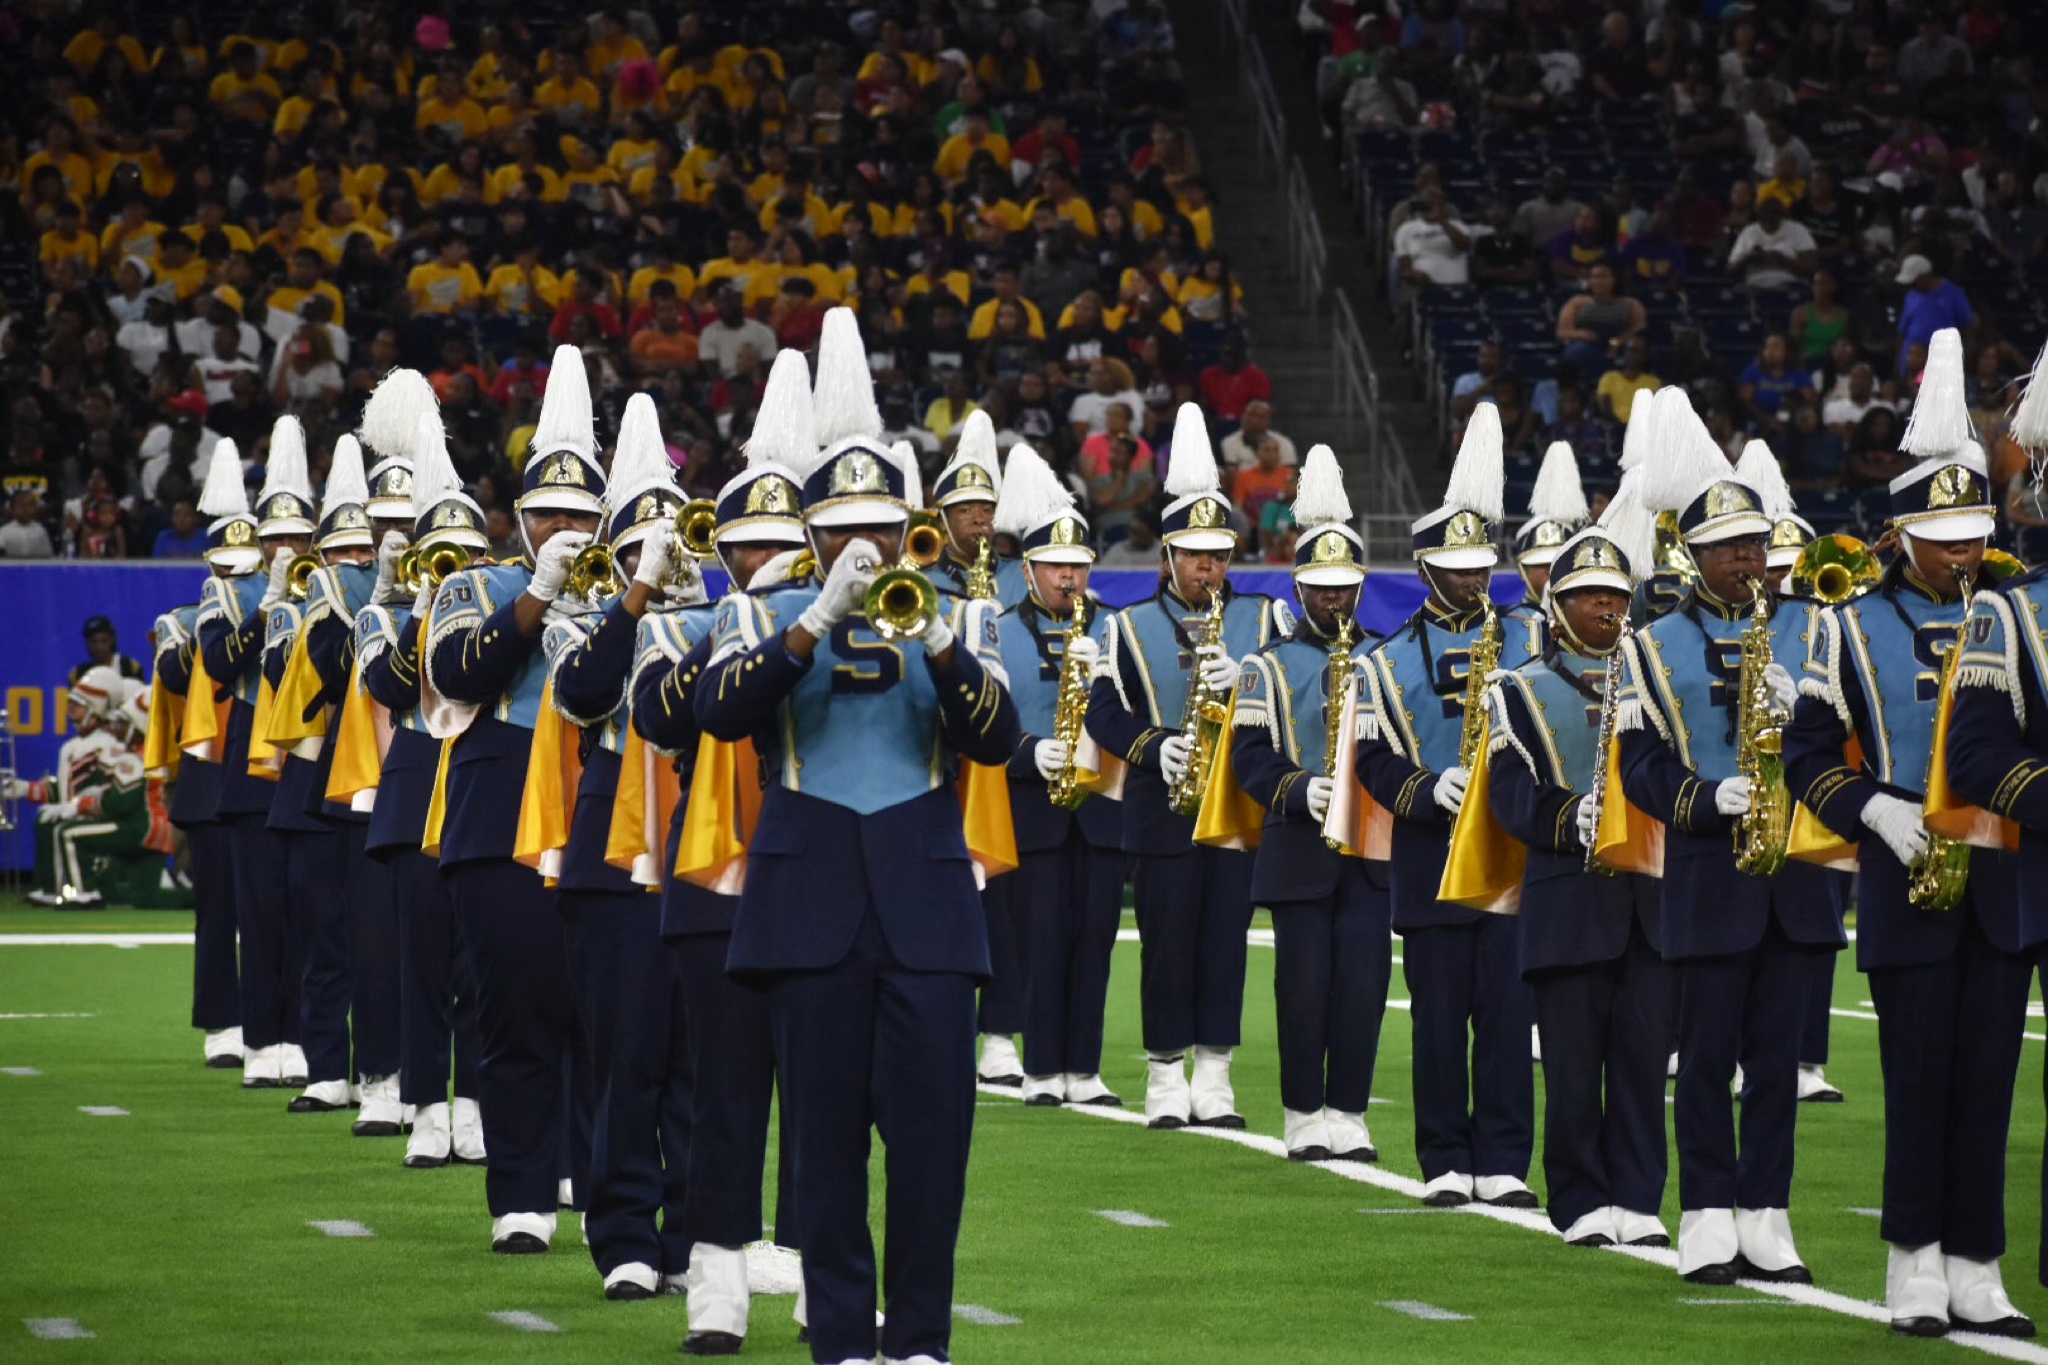 HBCU Bands and Hip-Hop Icons Shine at the National Battle of the Bands